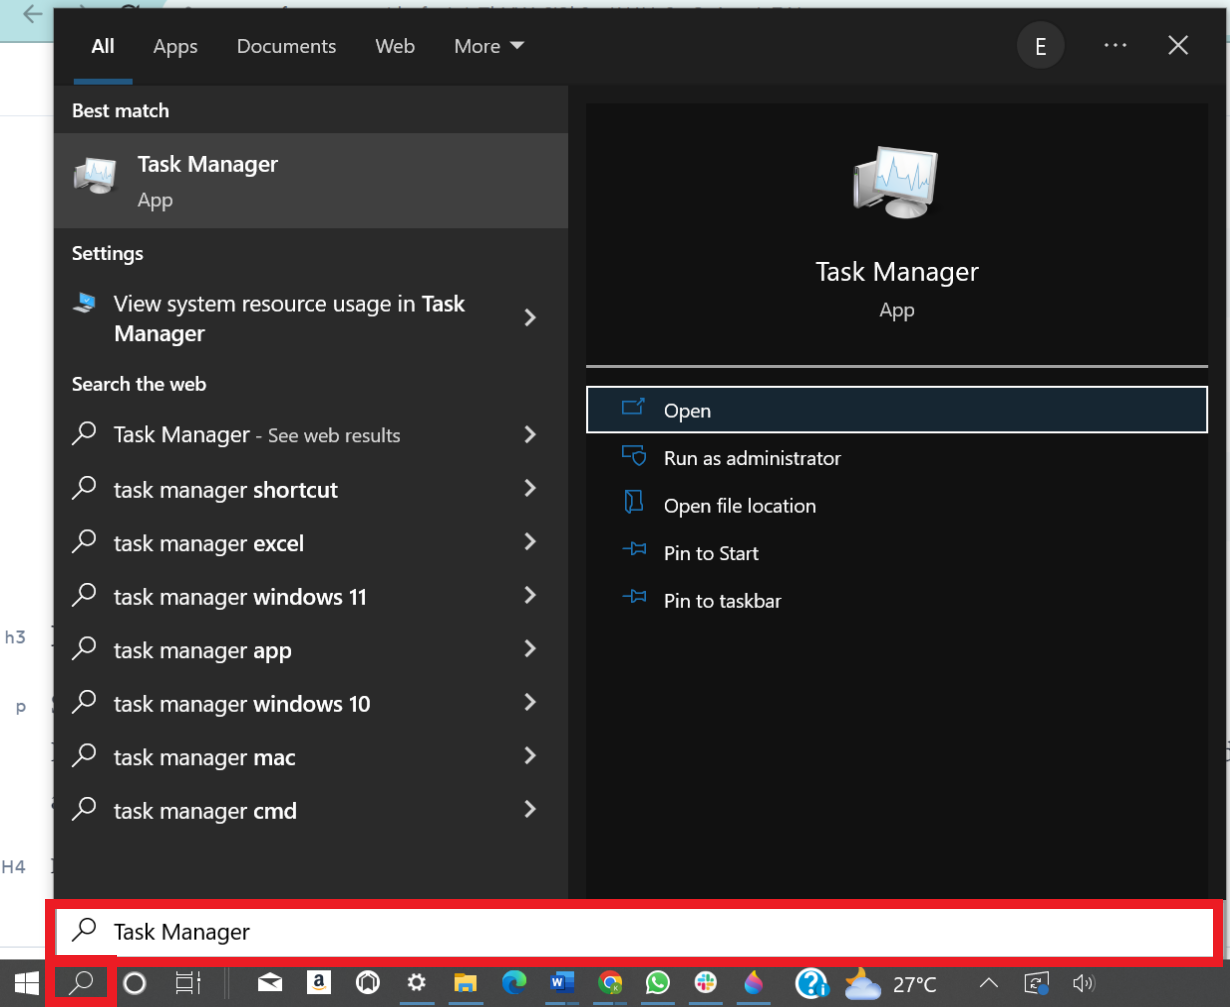 Locating the Task Manager using the Windows search widget